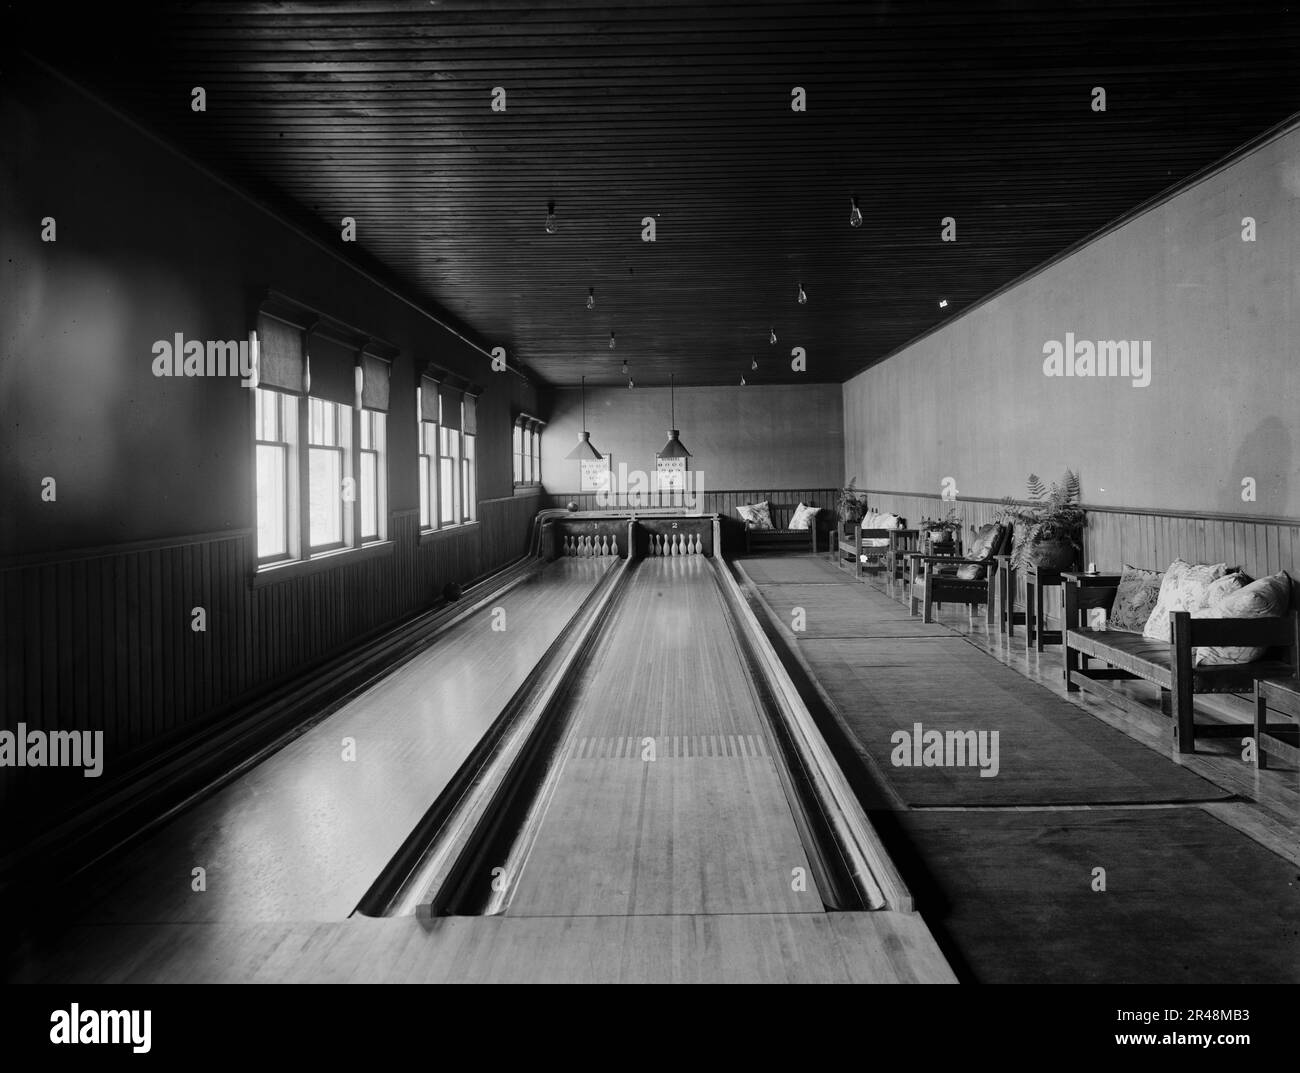 Bowling alleys, Paul Smith's casino, Adirondack Mountains, between 1900 and 1905. Stock Photo